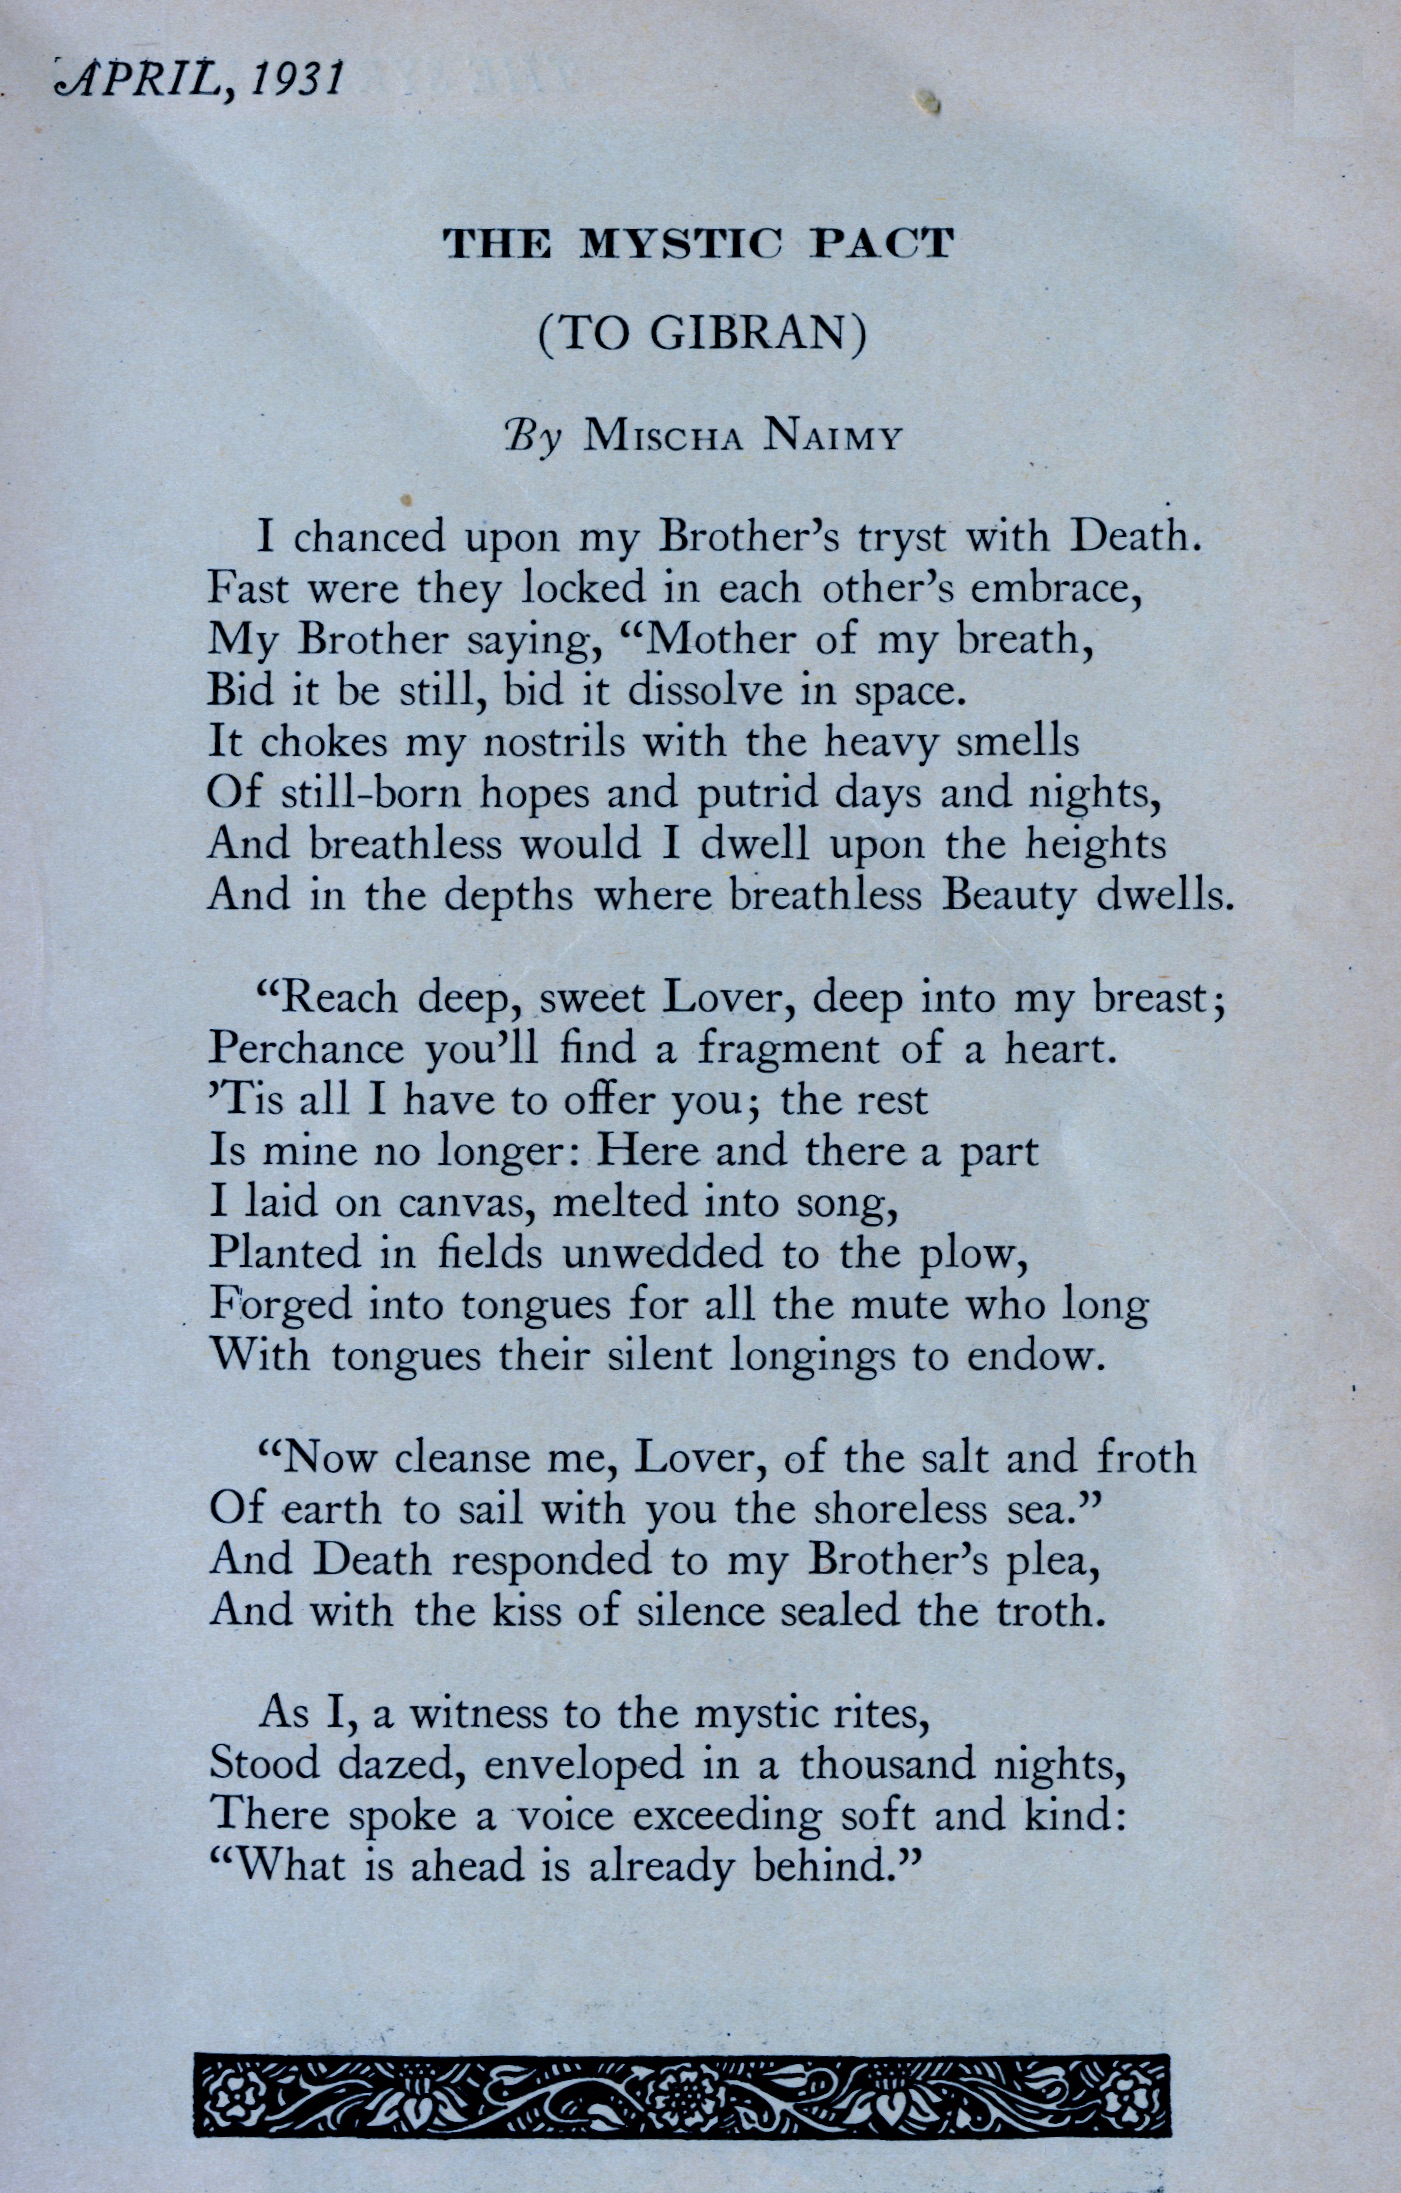 The poem published in The Syrian World April 1931